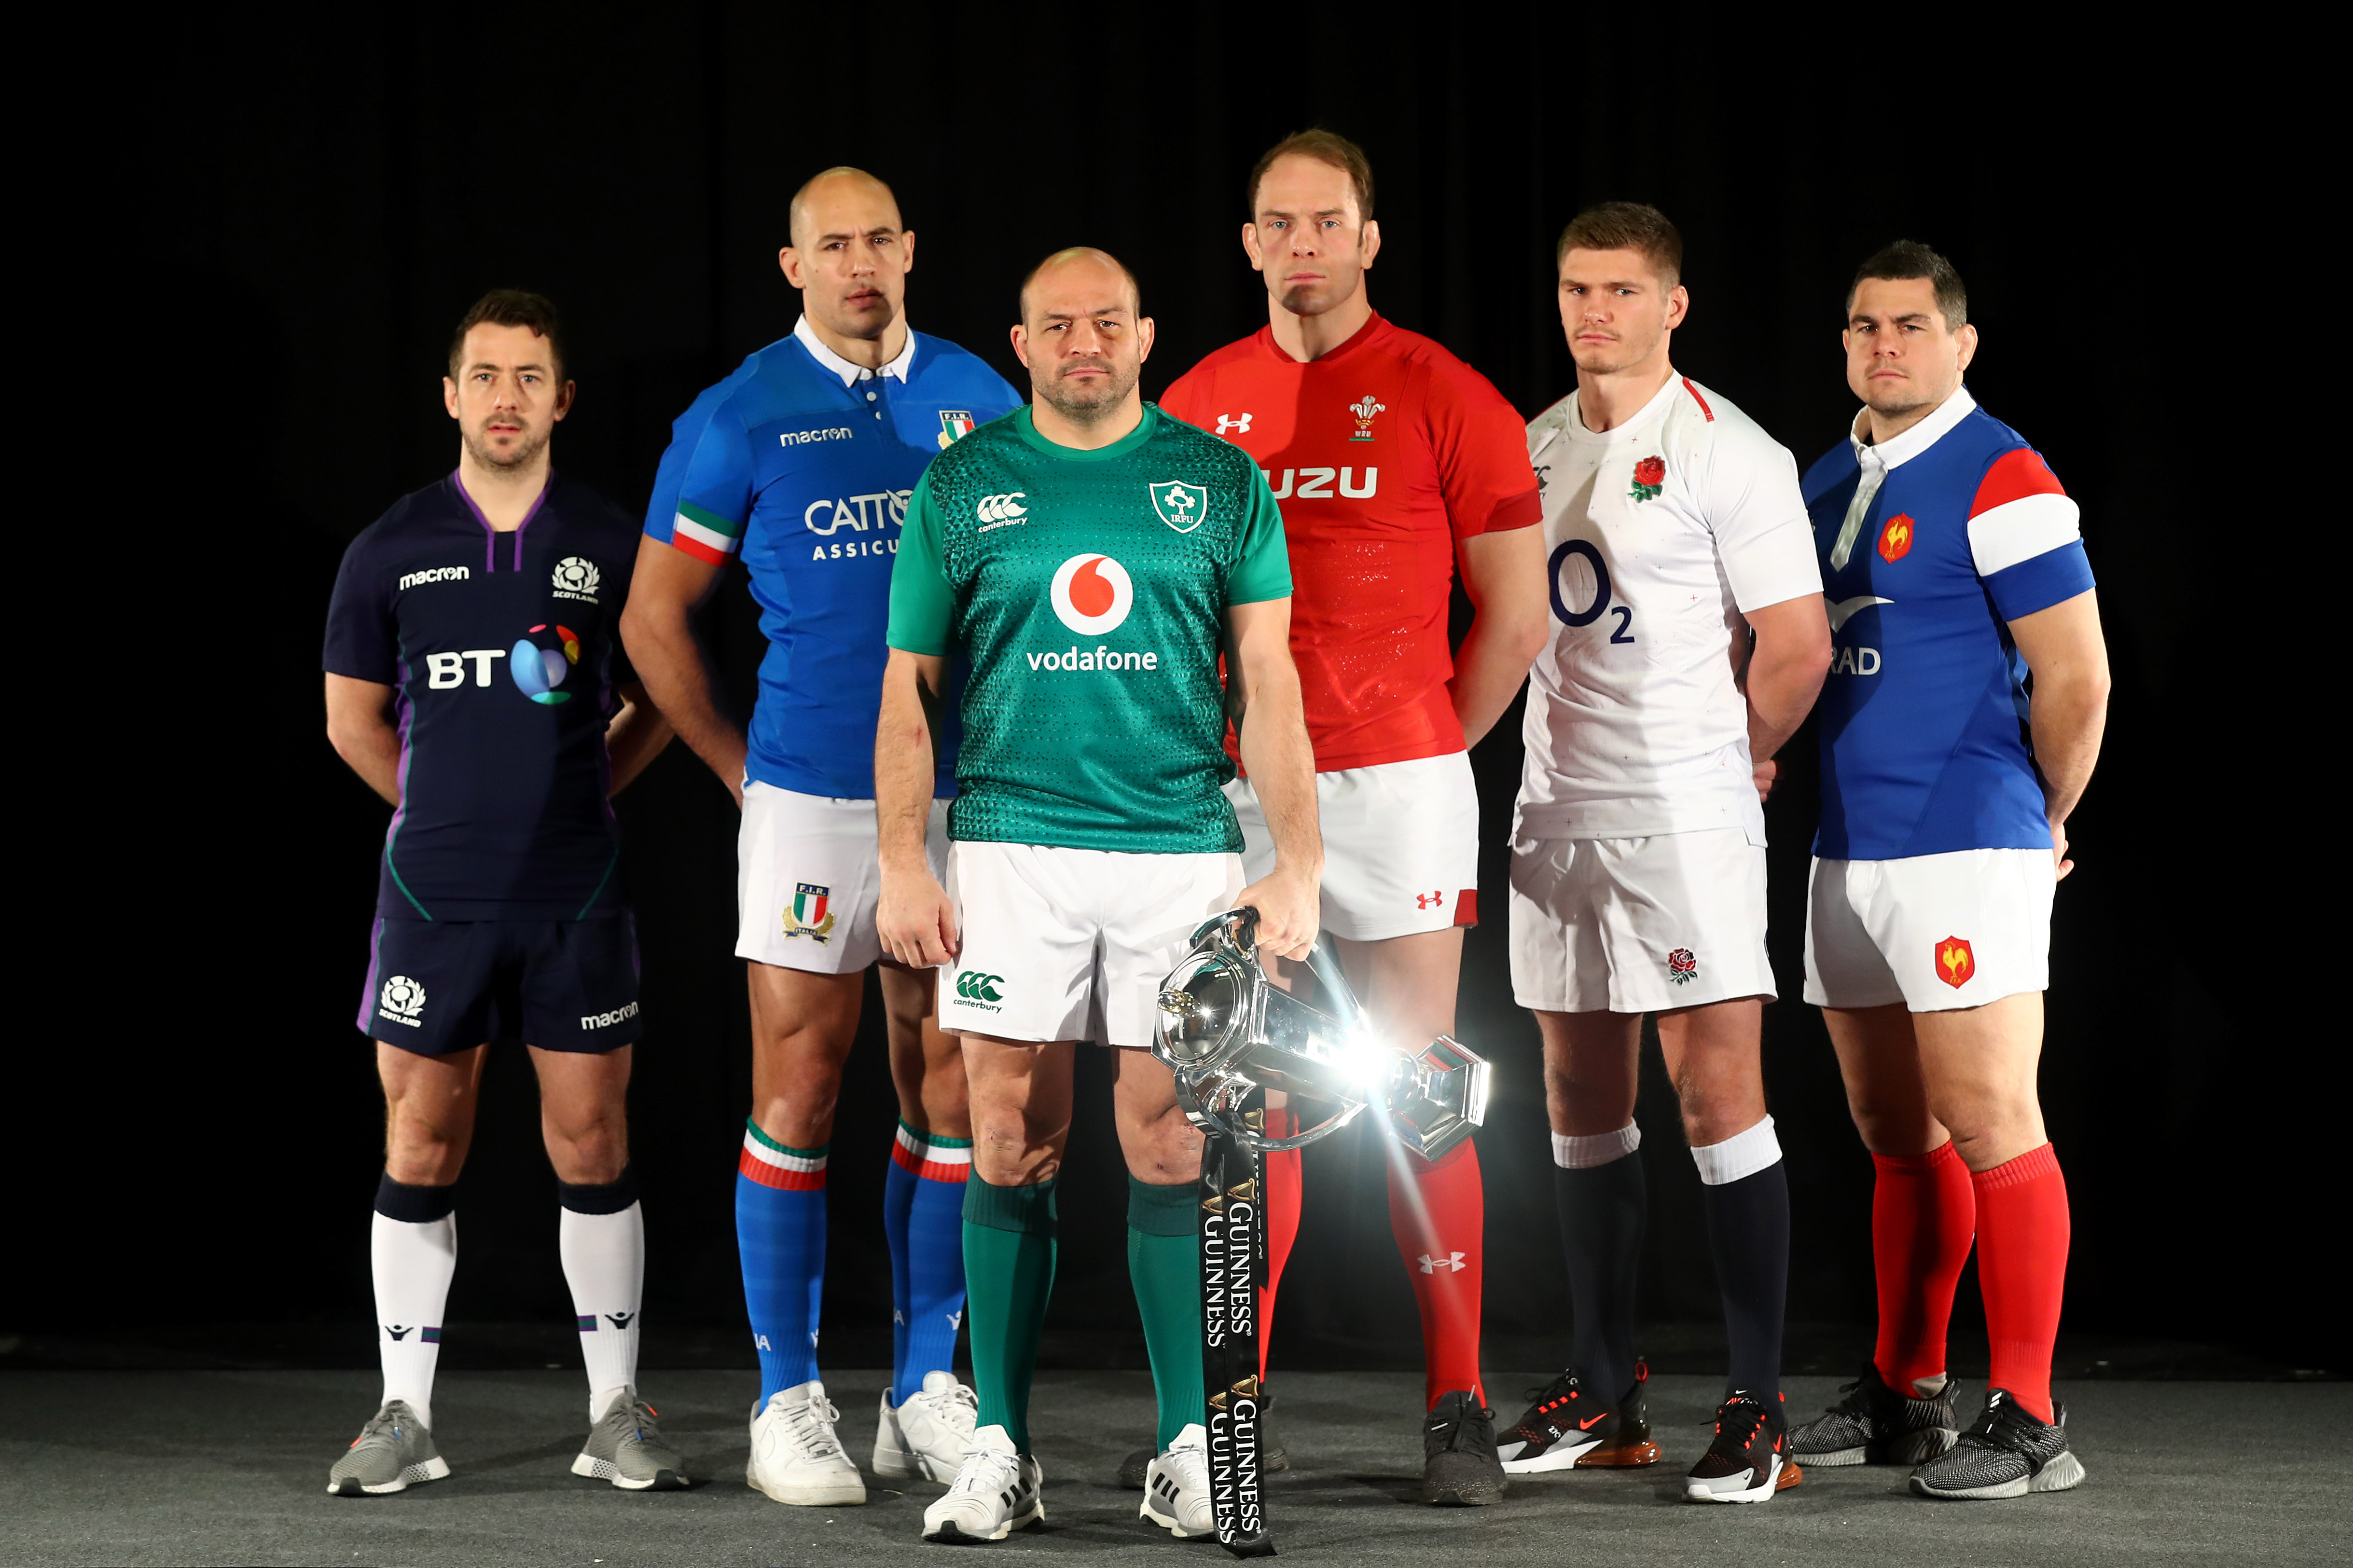 The 6 Nations begins this weekend.